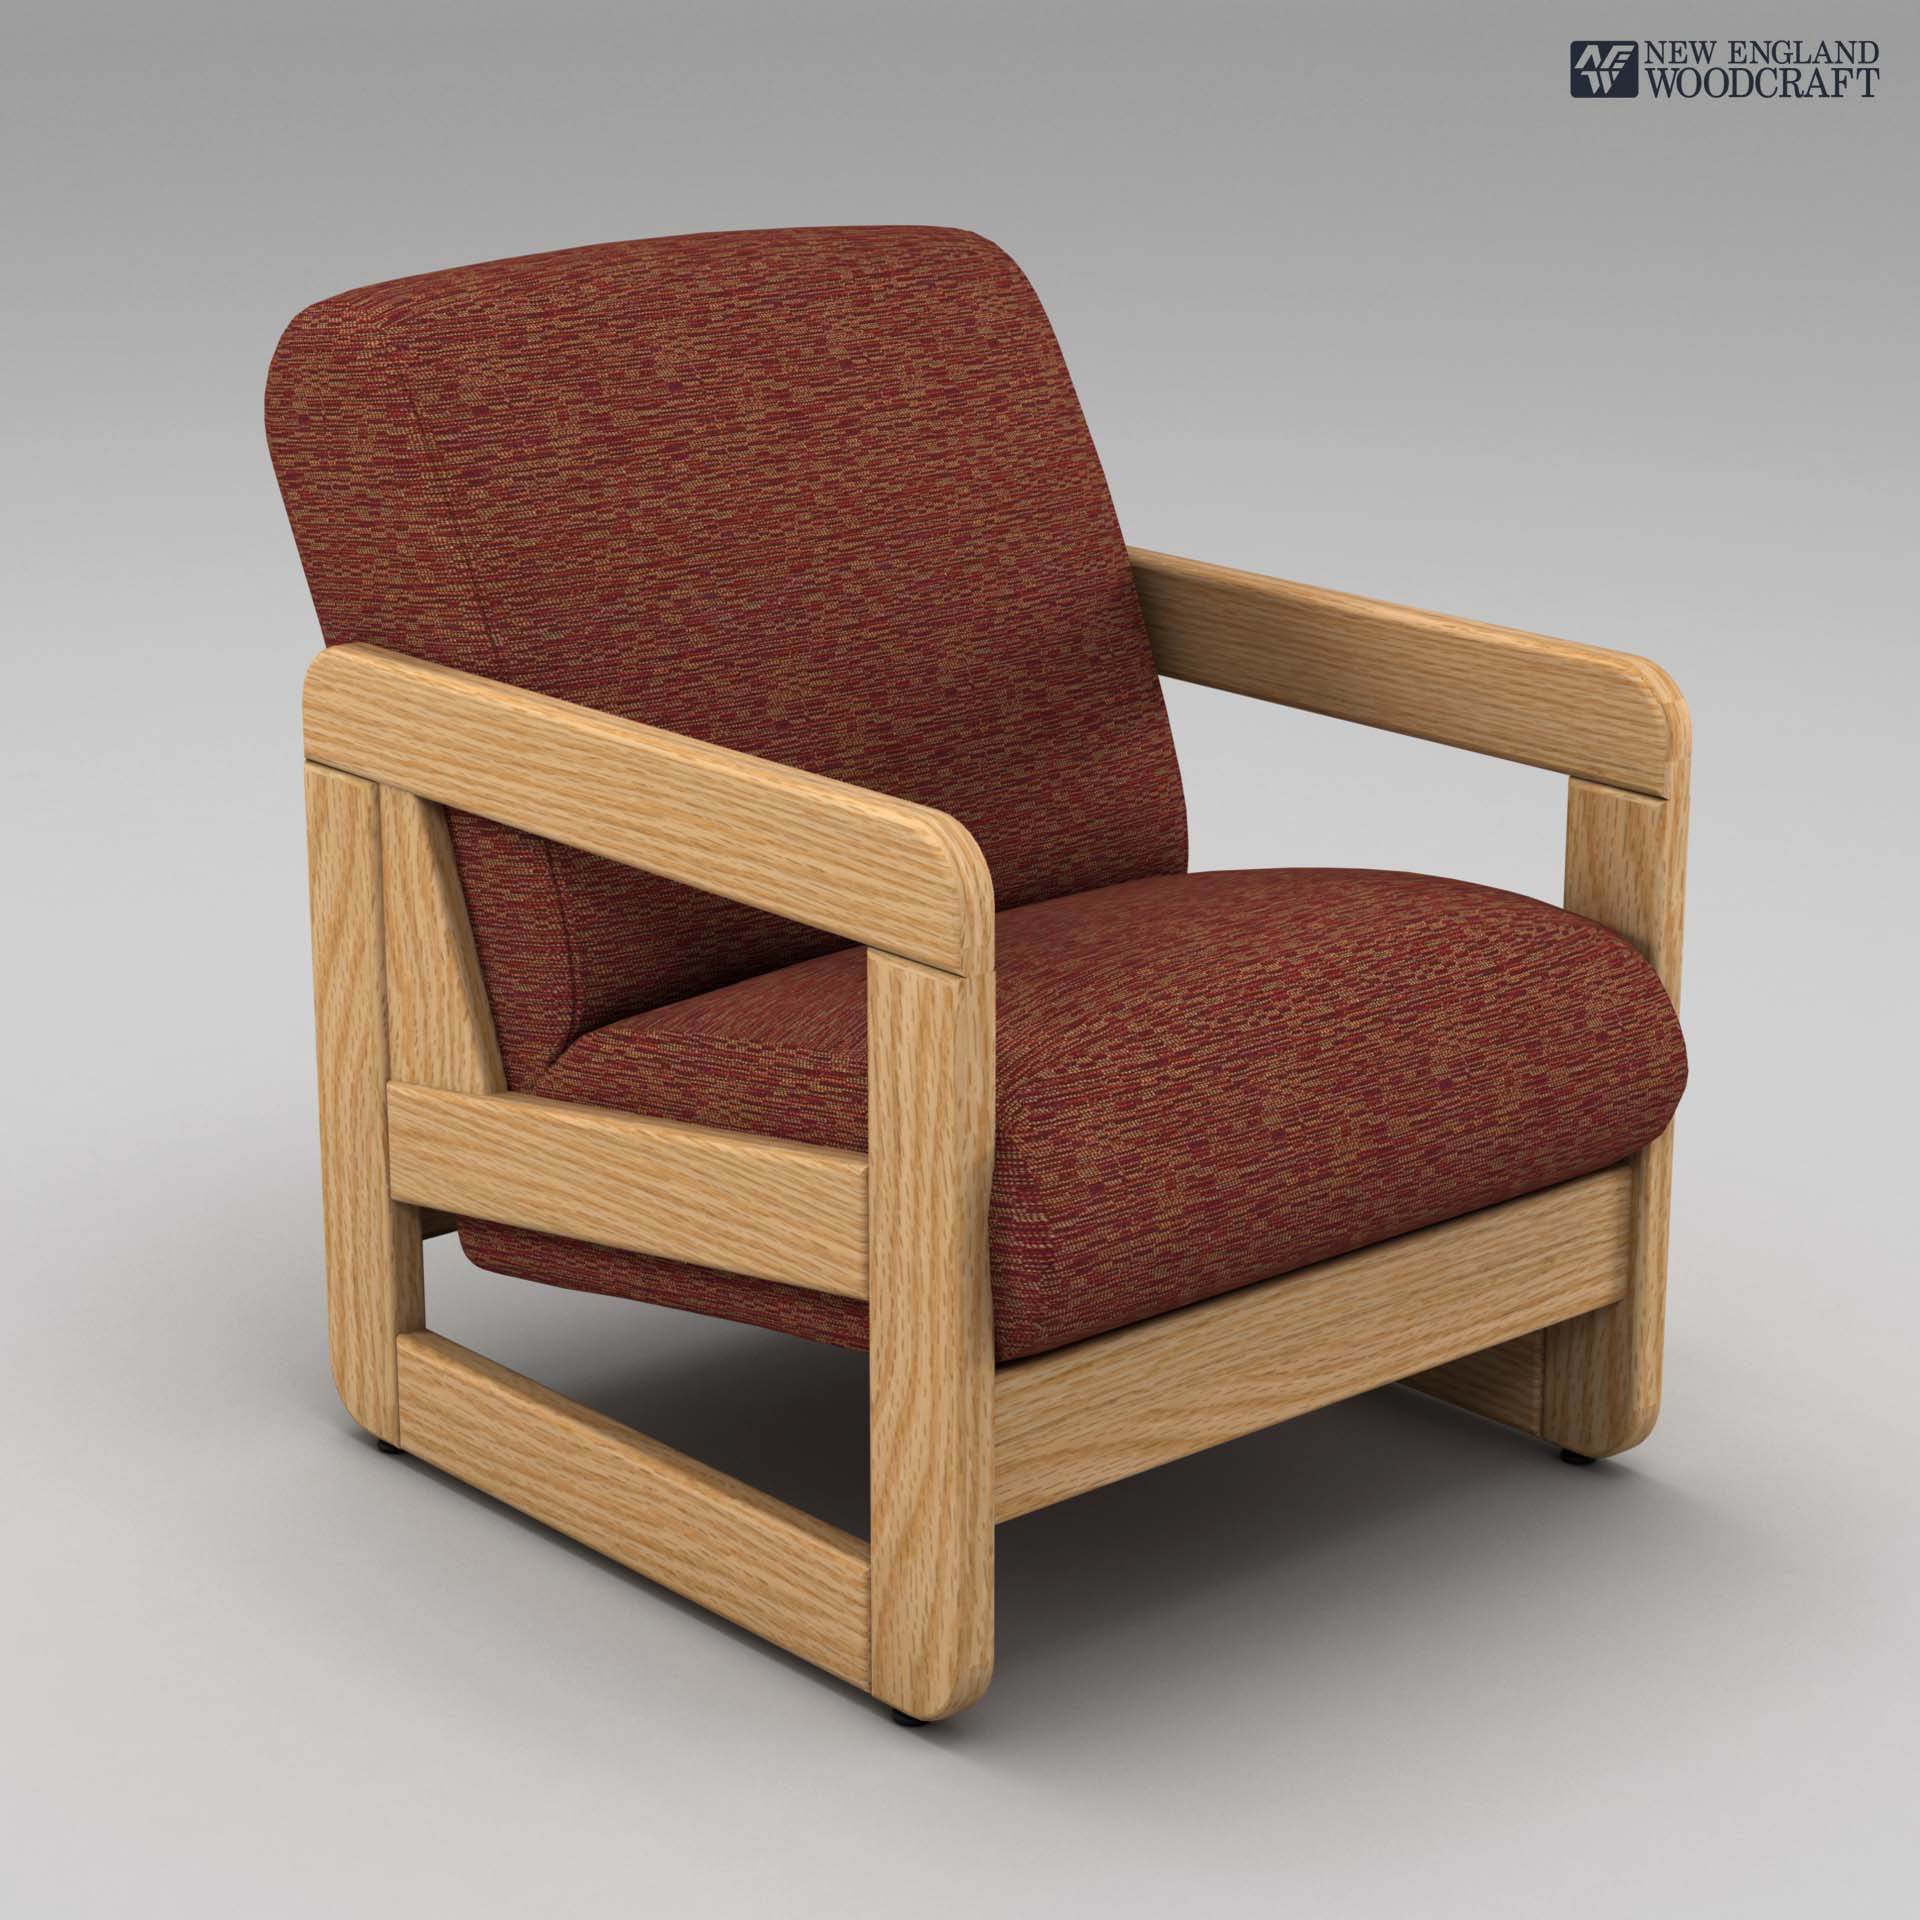 Whiting Lounge Series New England Woodcraft